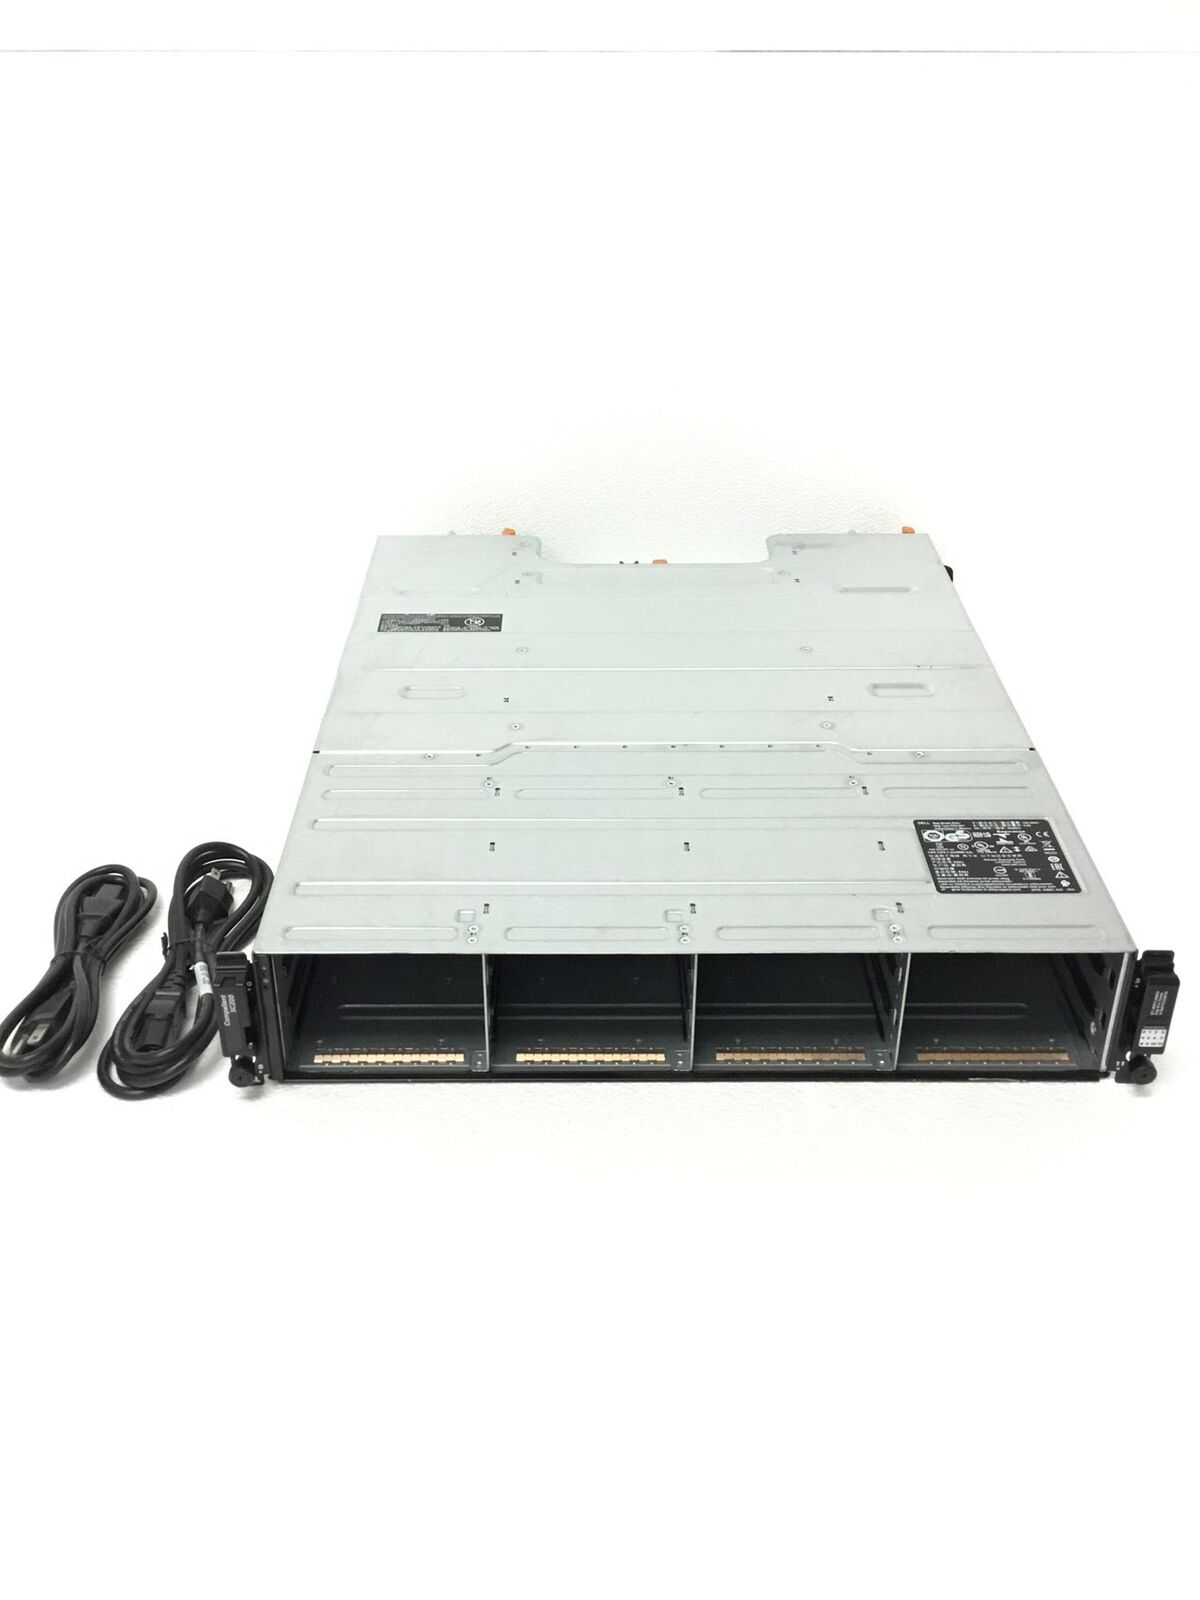 DELL Compellent E04J-SC200 Hard Drive Array w/2xE09M Cards,2x700W PS, NoHD,WORKS